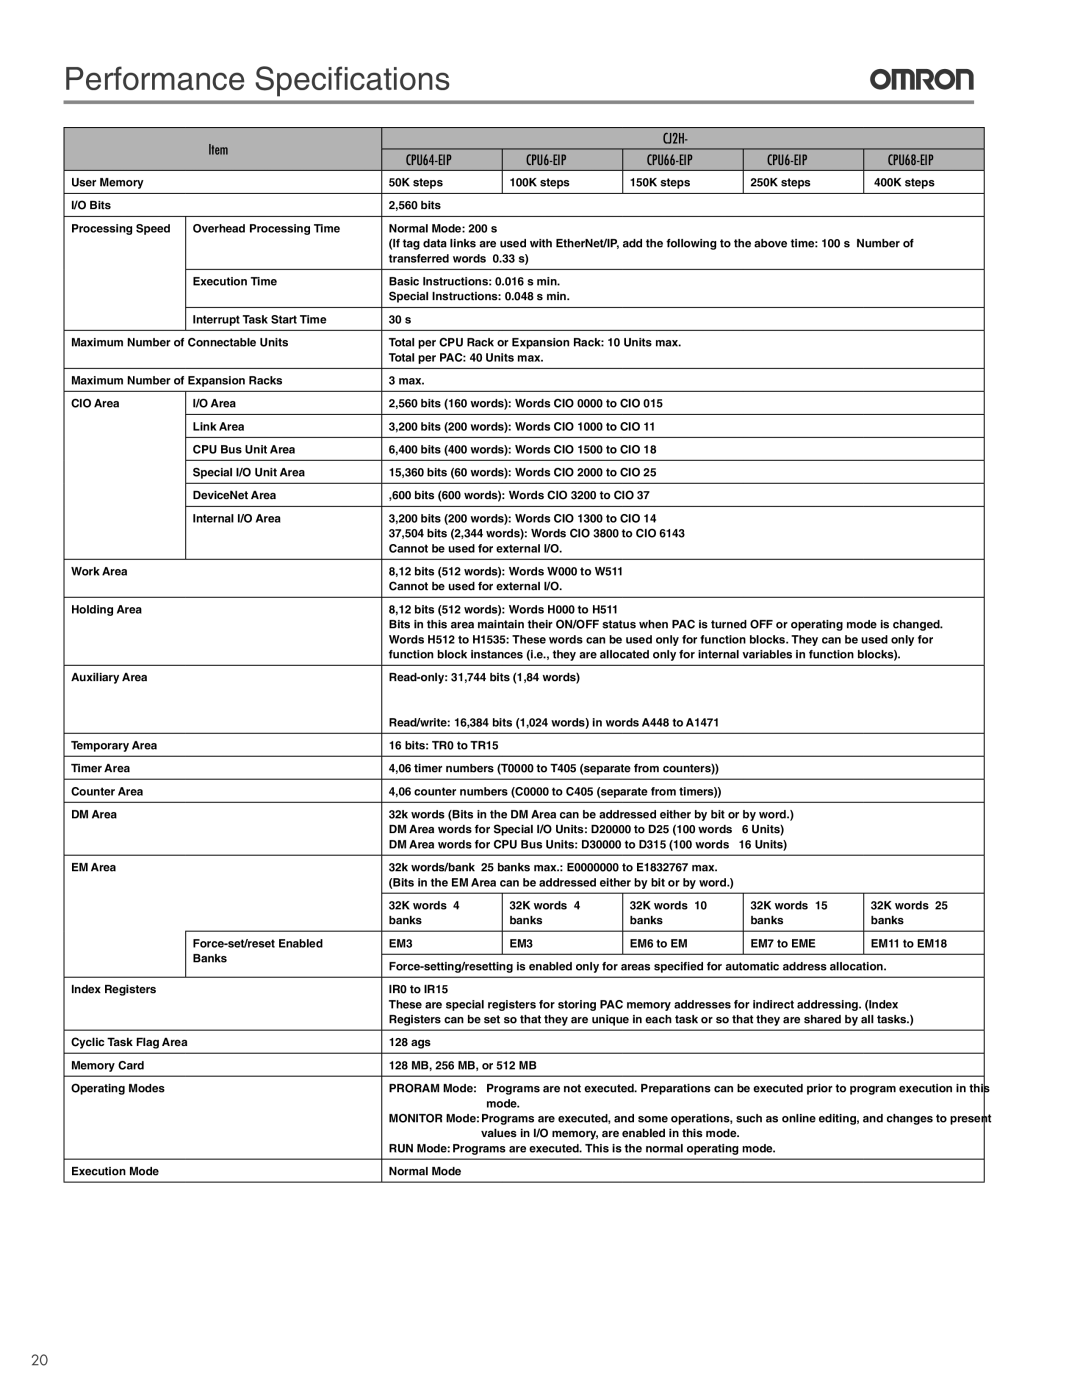 Omron CJ2 manual Performance Specifications, EM3 